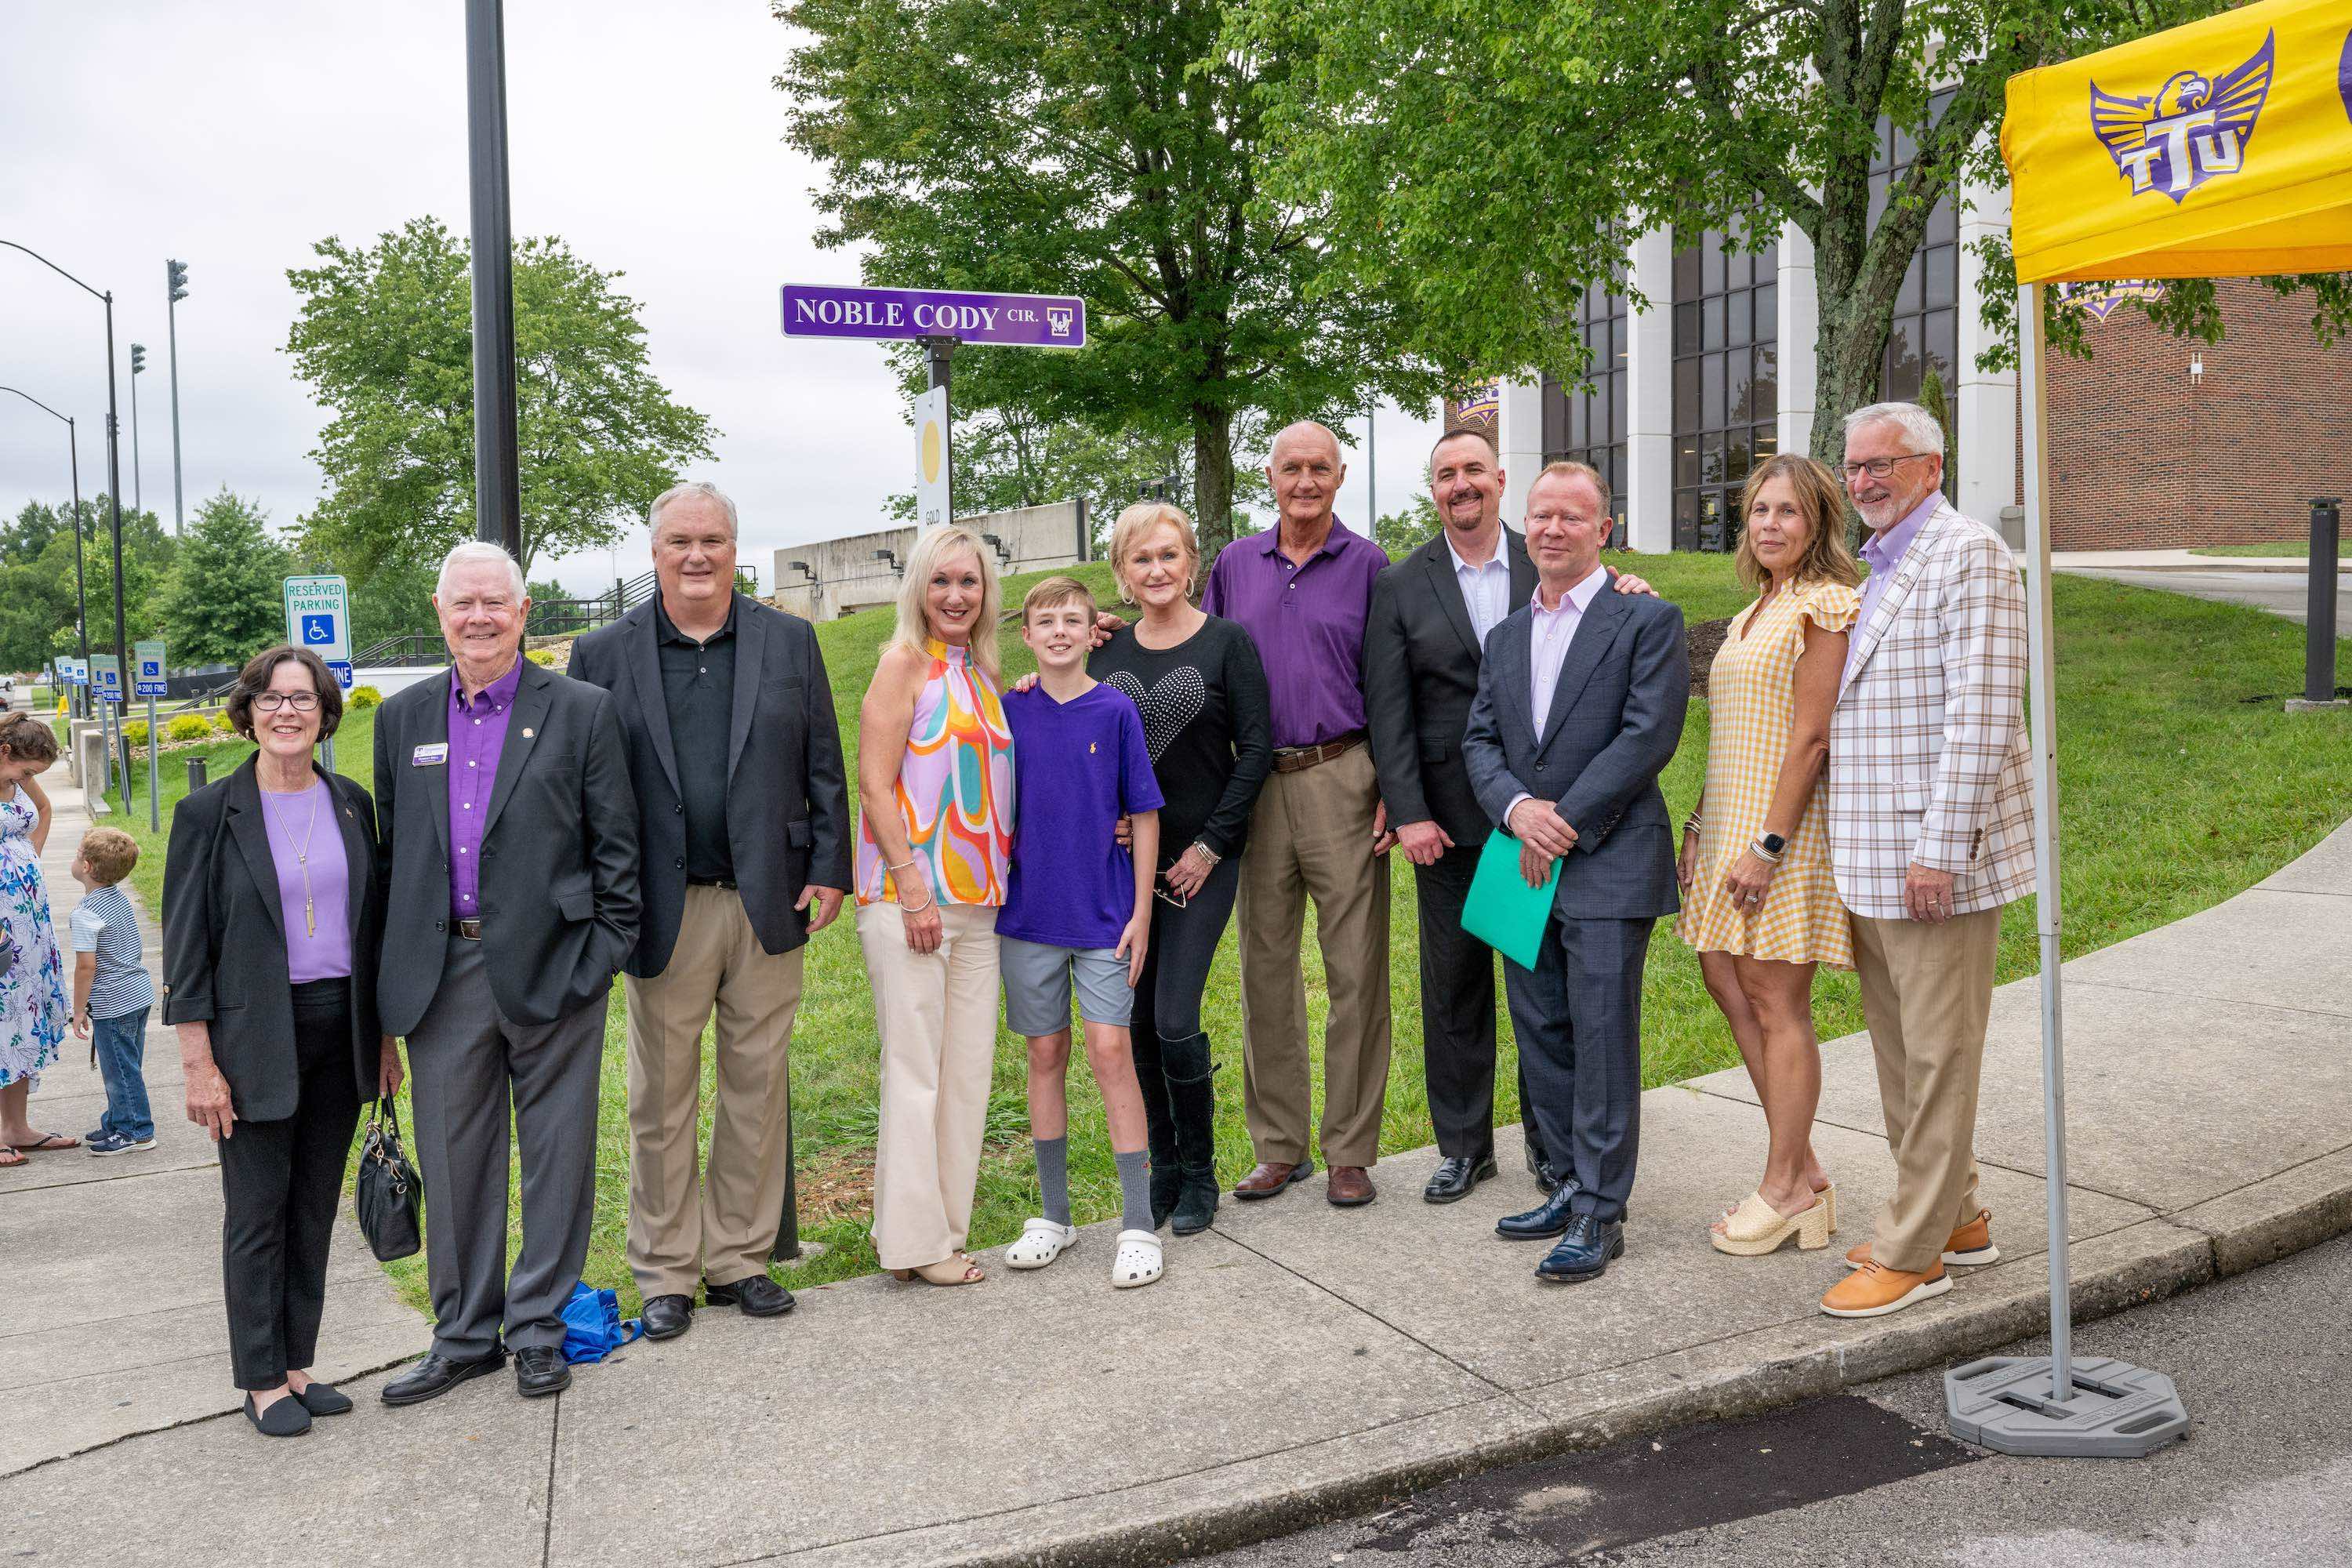 Members of the Cody family pictured with Tech President Phil Oldham, First Lady Kari Oldham, President Emeritus Bob Bell, former First Lady Gloria Bell, and longtime family friend Lewis Matheny at the newly named Noble Cody Circle. 